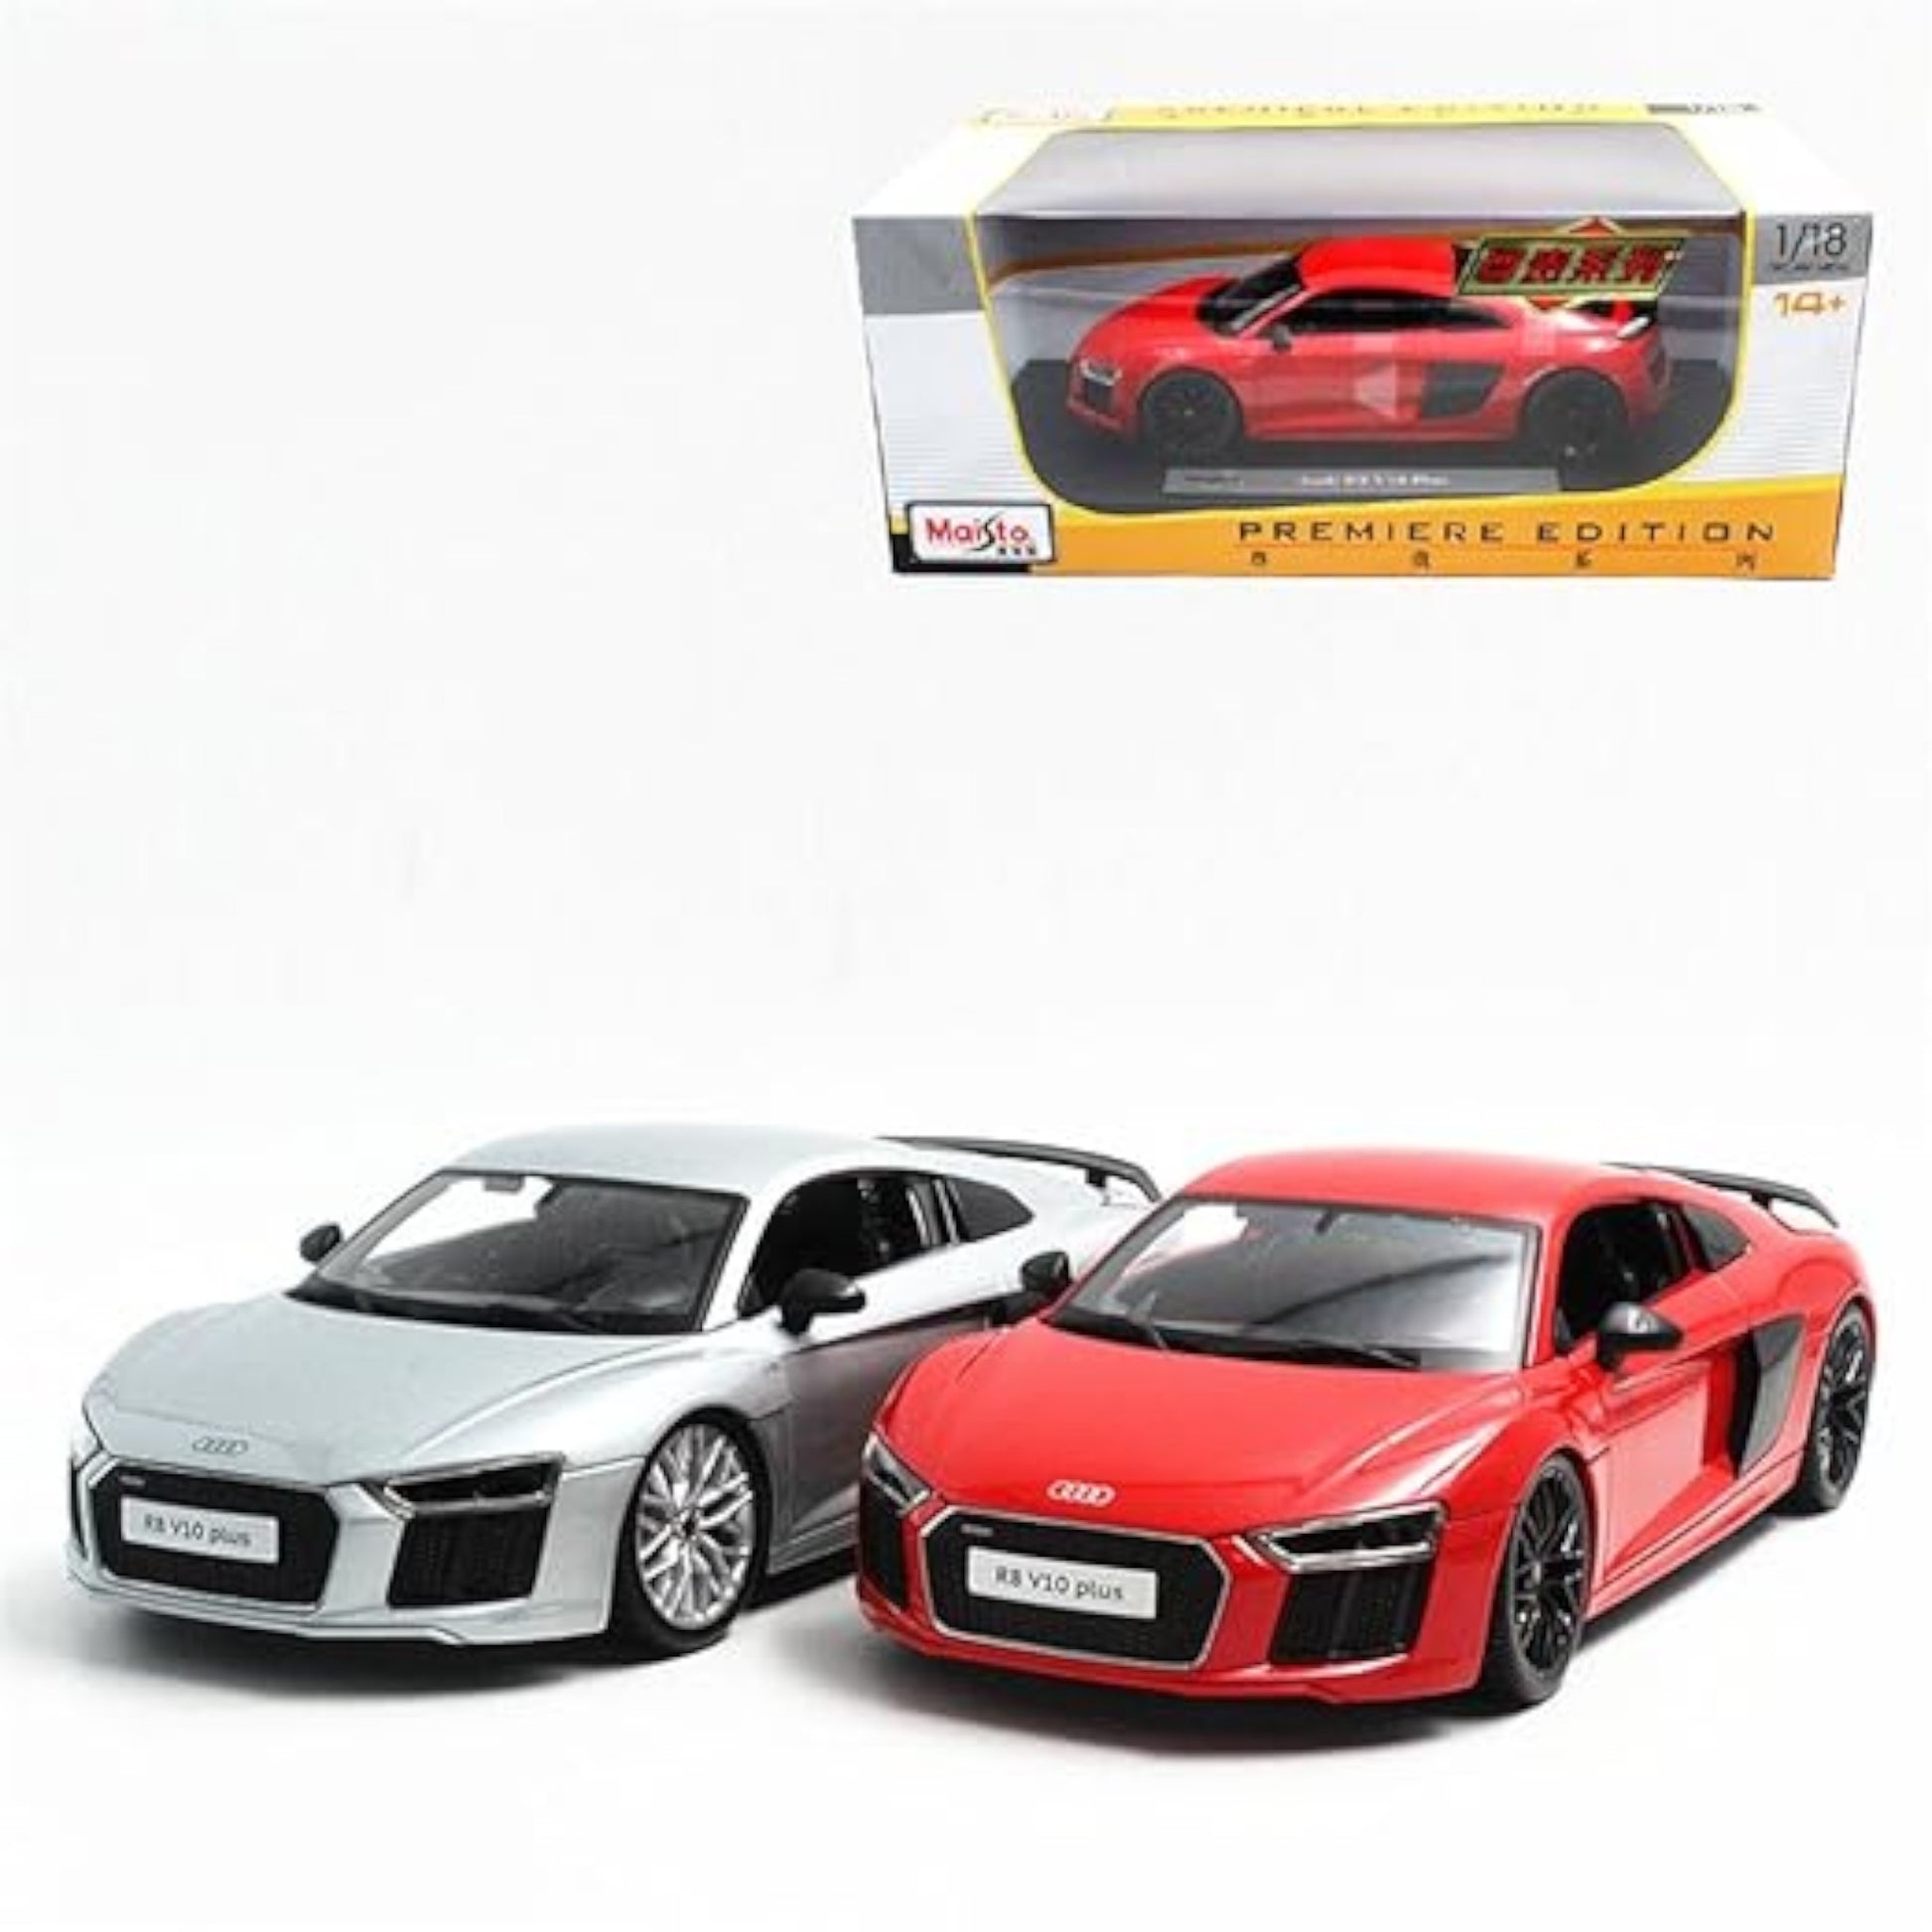 1/18 Diecast AUDI R8 V10 PLUS 2015 RED Scale Model car by Maisto